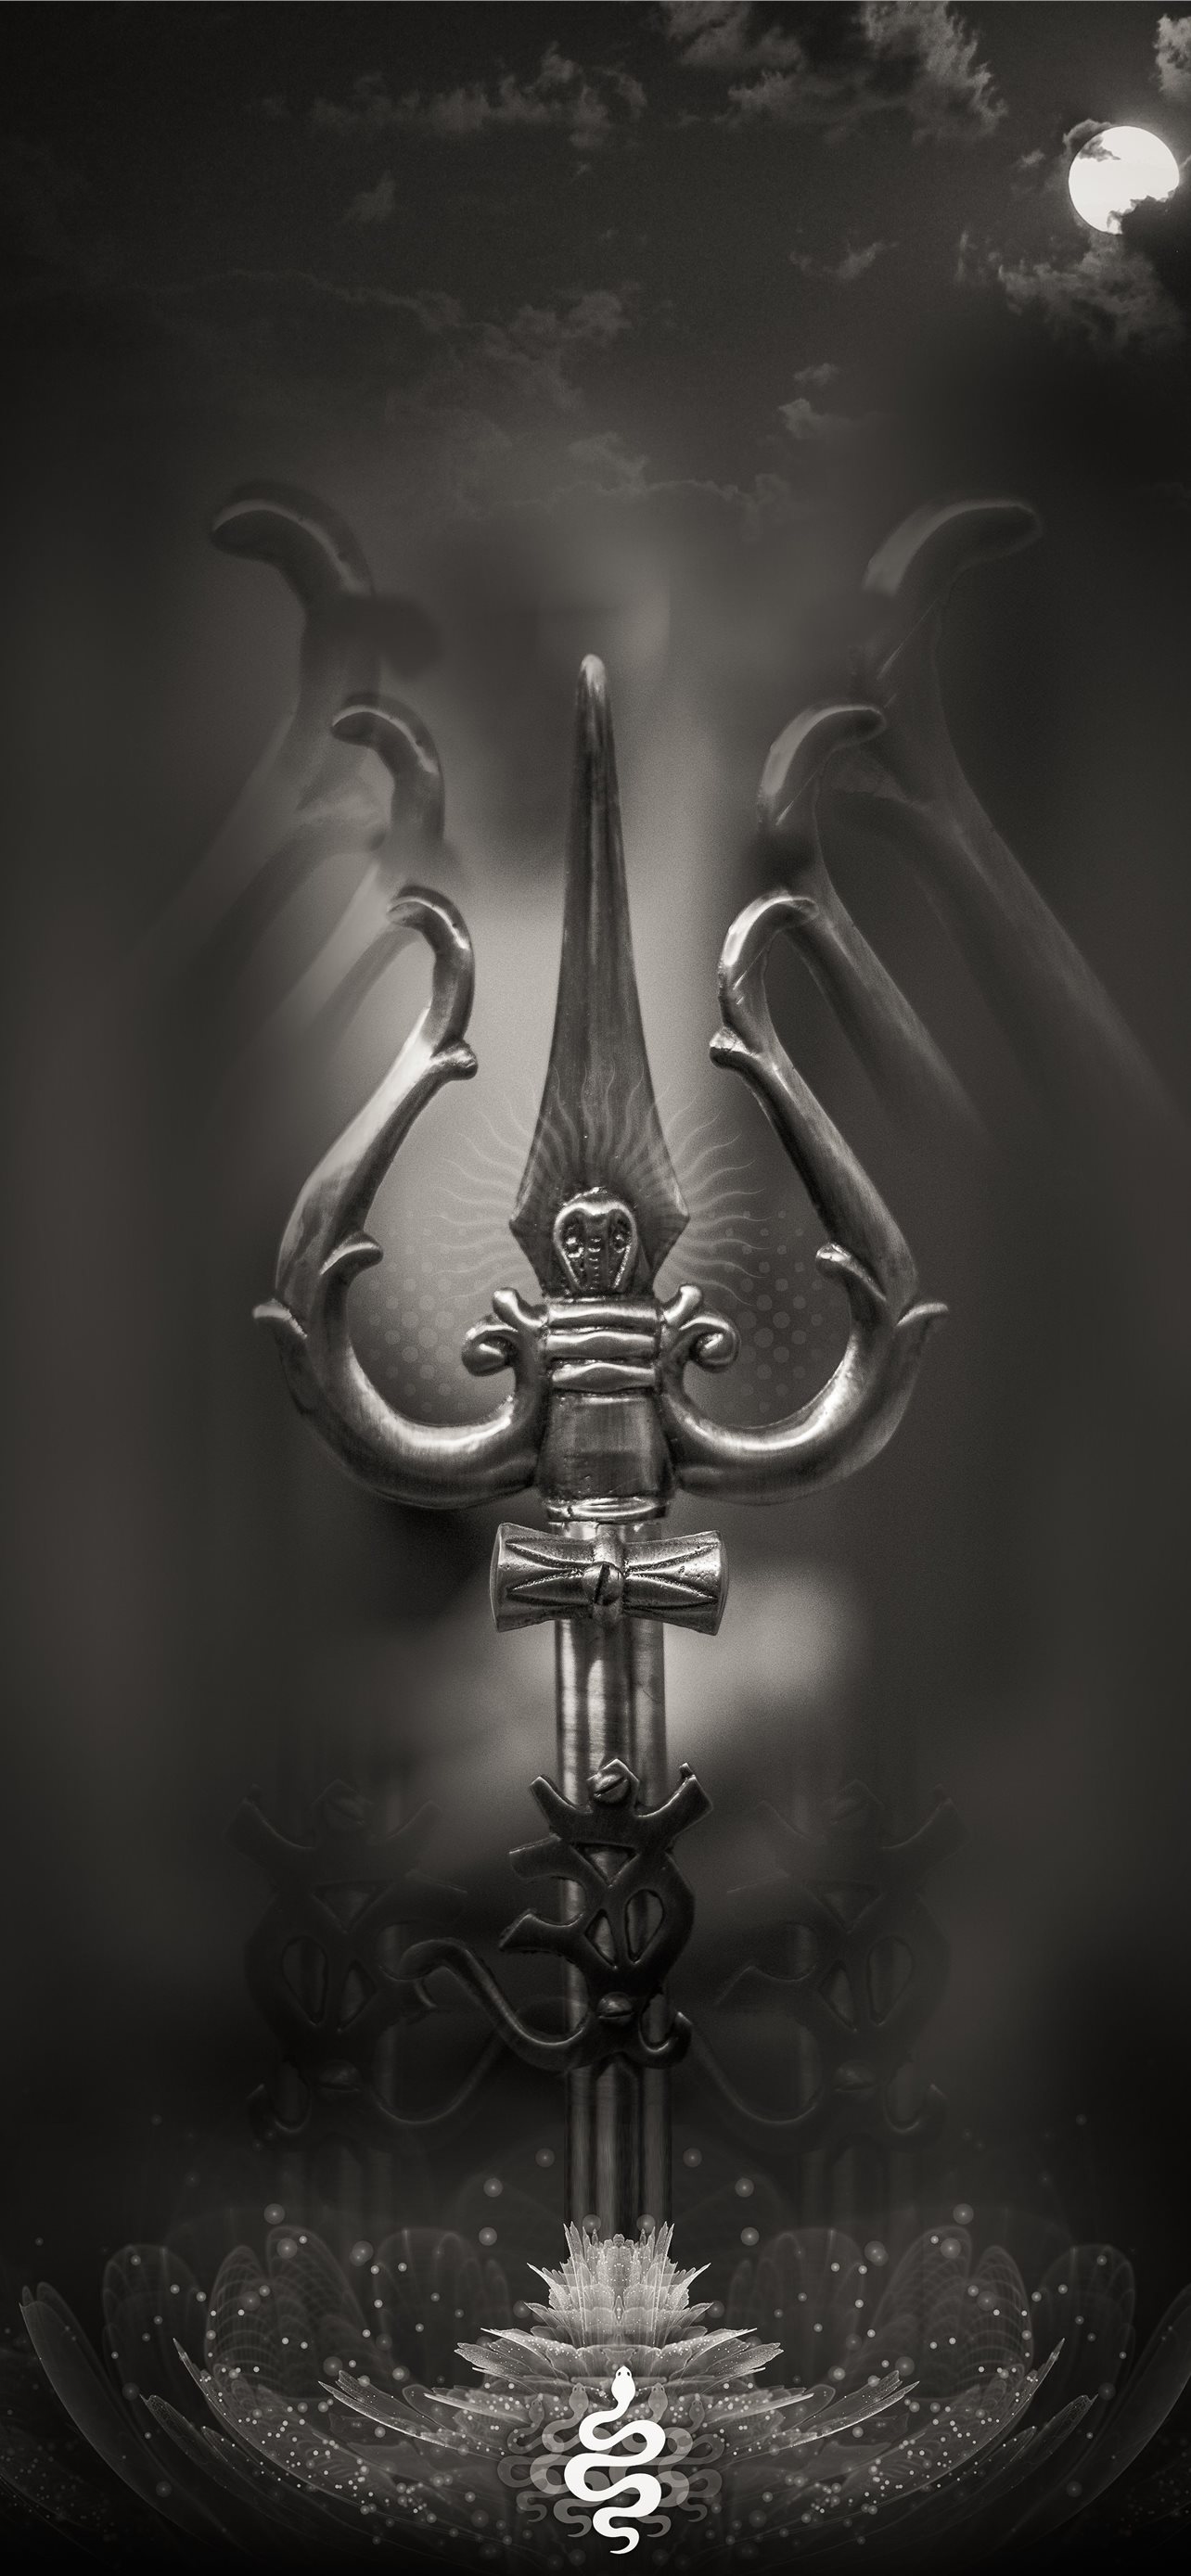 mystical shivling wallpaper for mobile  1080 x 1920  Ghantee  Shiva lord  wallpapers Photos of lord shiva Lord shiva hd images